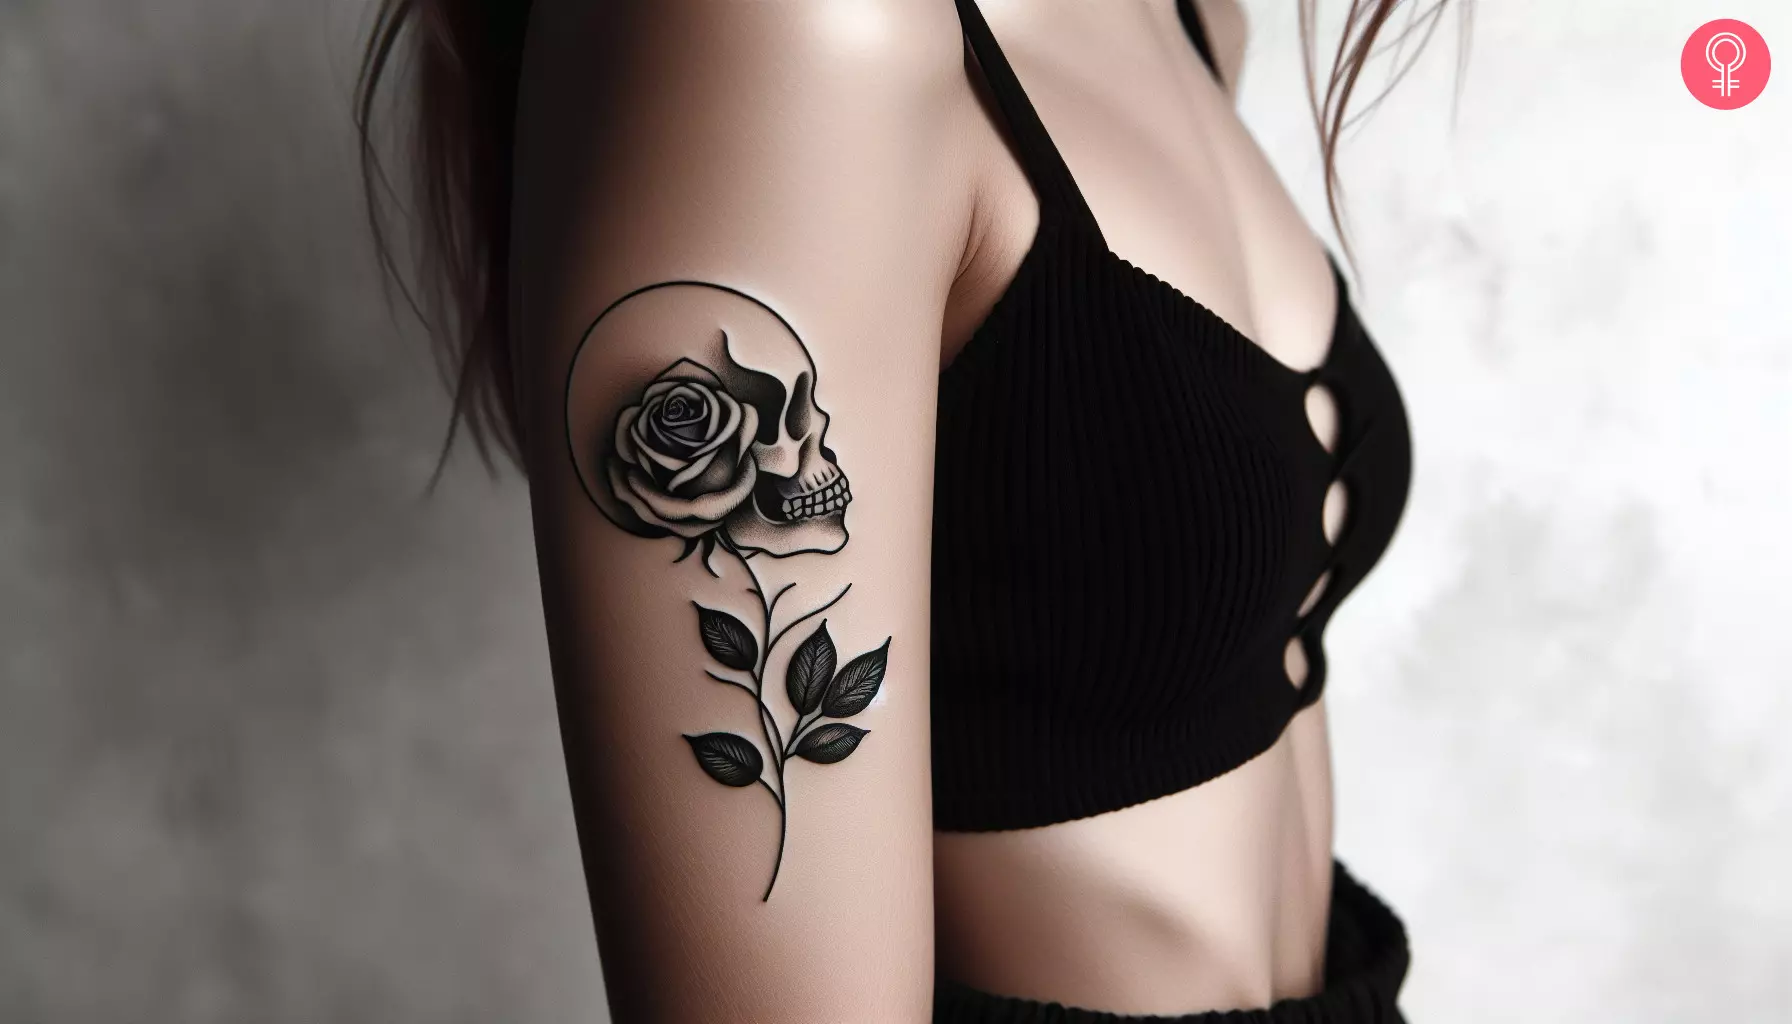 Woman with skull rose tattoo on her upper arm